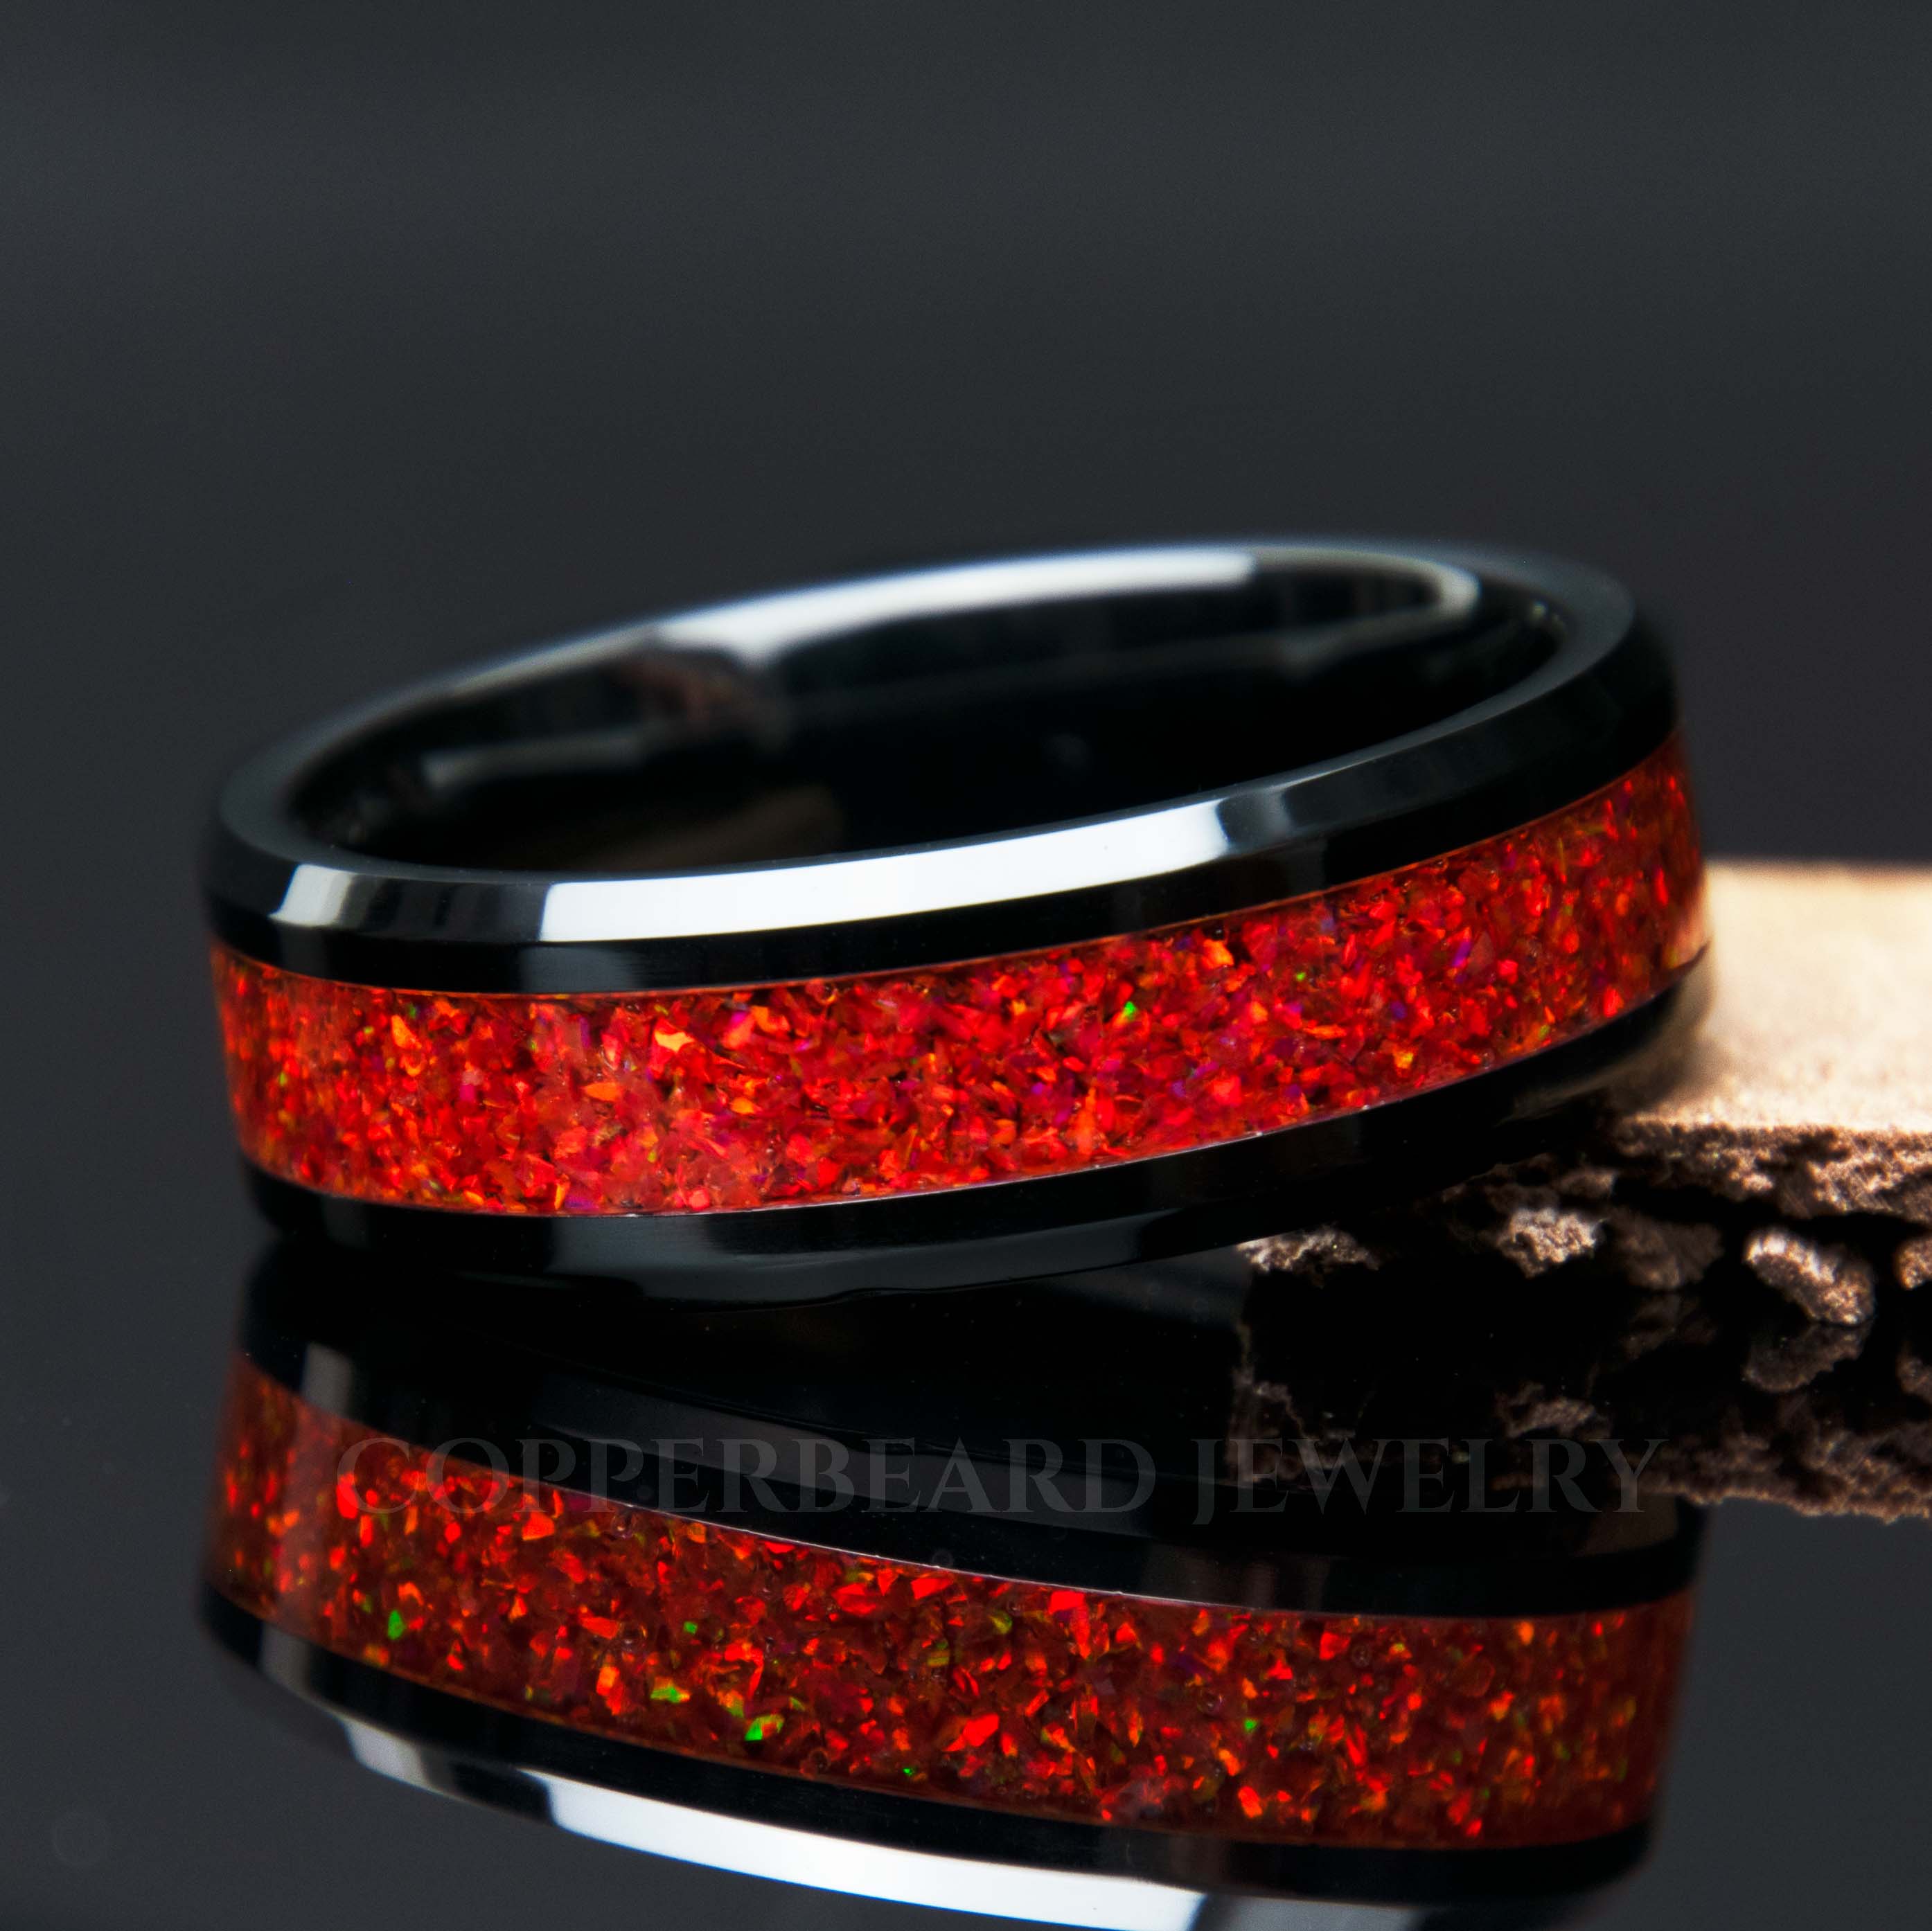 Ruby Red Opal Ring With Black Ceramic Band Copperbeard Jewelry